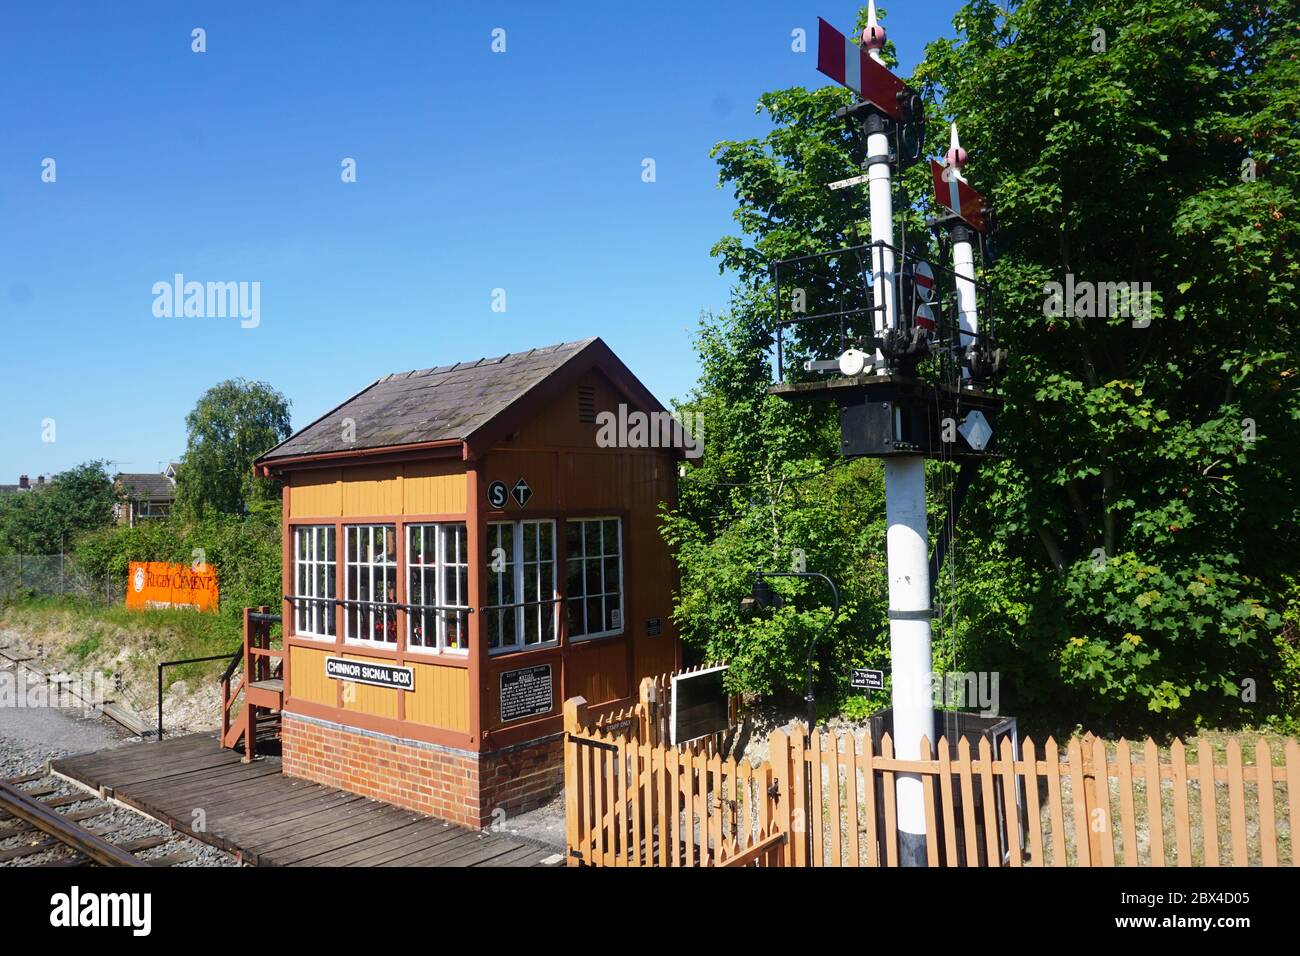 Old signal box at English Heritage Chinnor and Princes Risborough Railway Station at Chinnor, Oxfordshire, UK Stock Photo